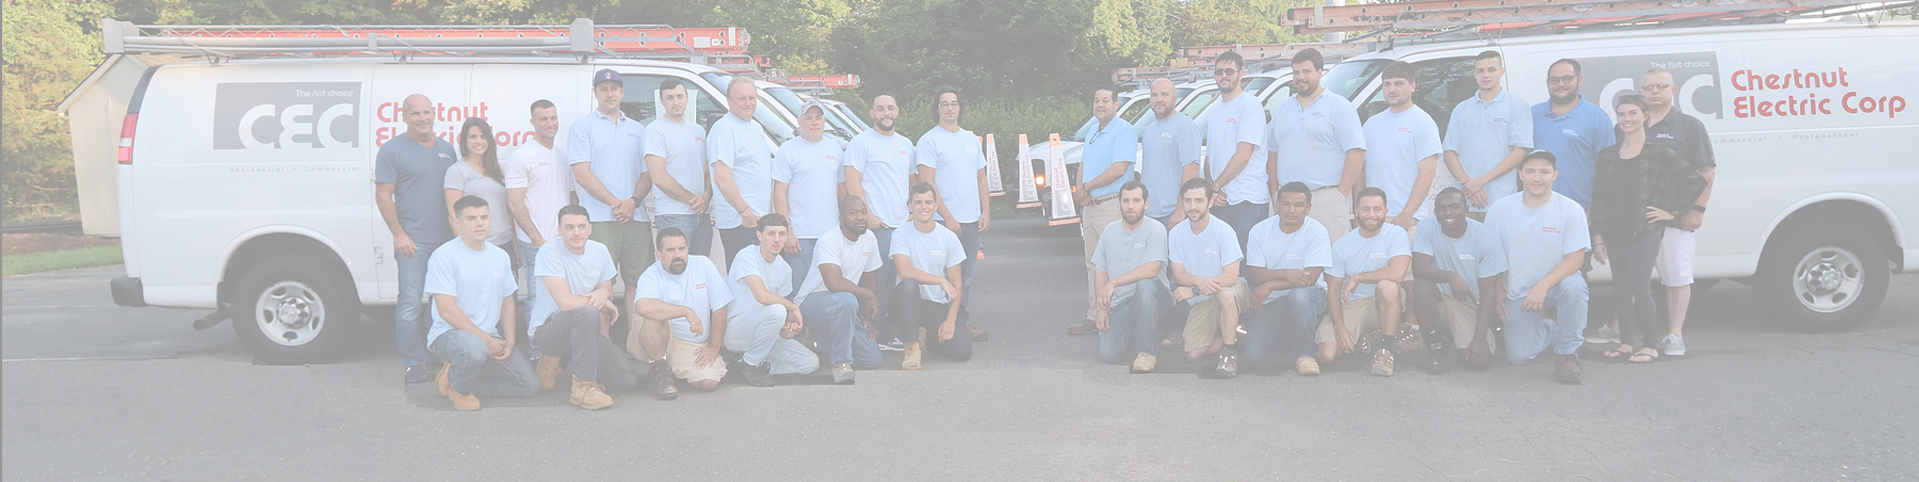 Chestnut Electric Team. Electricians and Electrical Contractors serving Connecticut